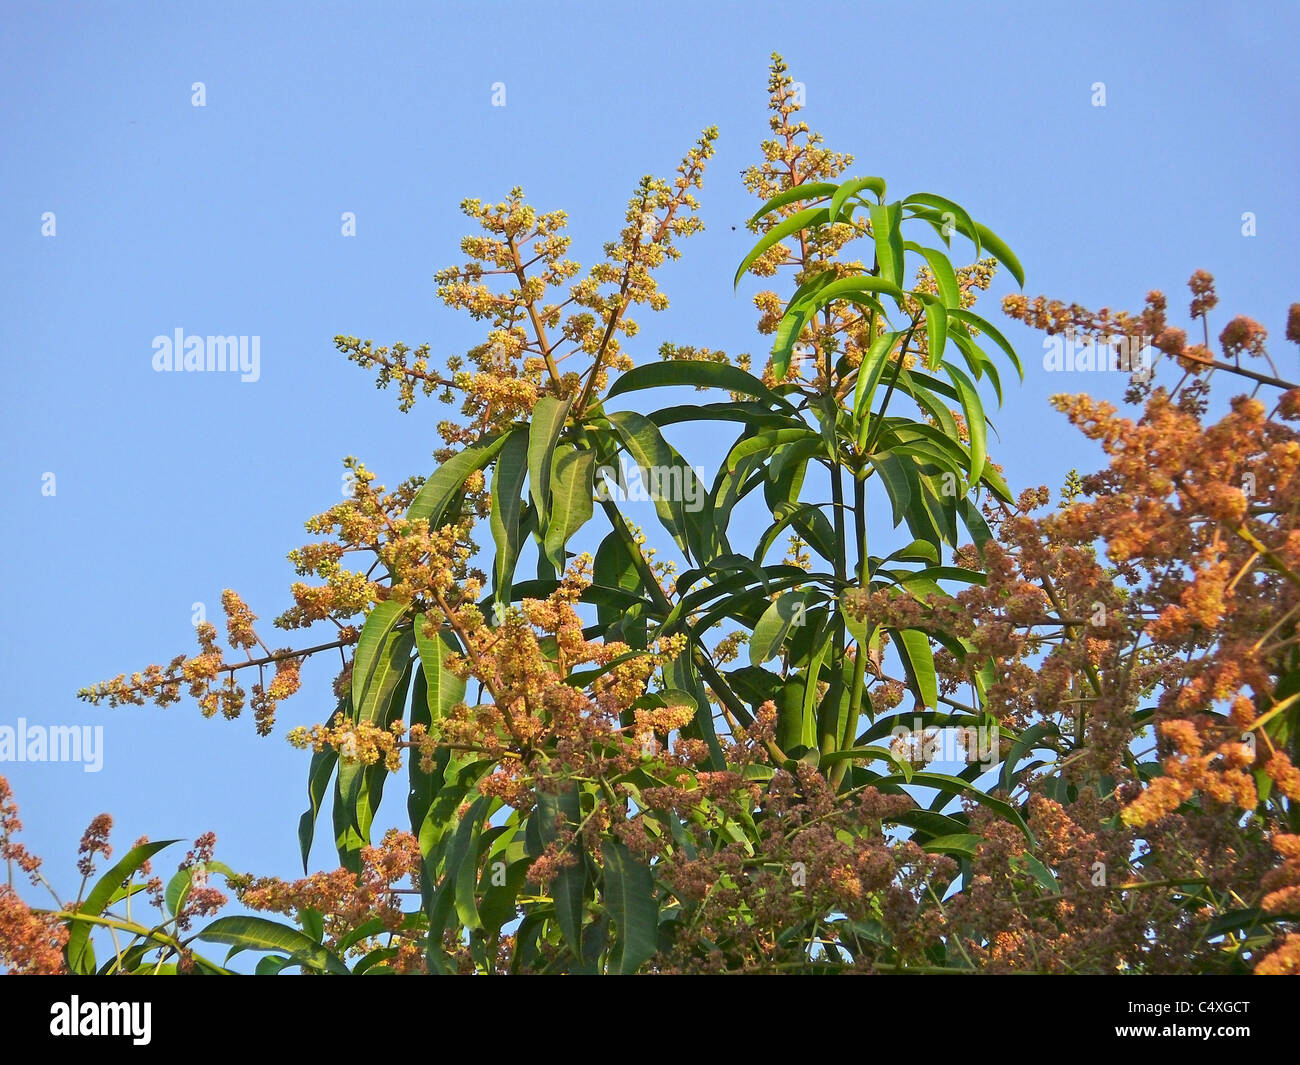 https://c8.alamy.com/comp/C4XGCT/mango-tree-in-bloom-with-mango-flowers-appear-in-spring-to-summer-C4XGCT.jpg